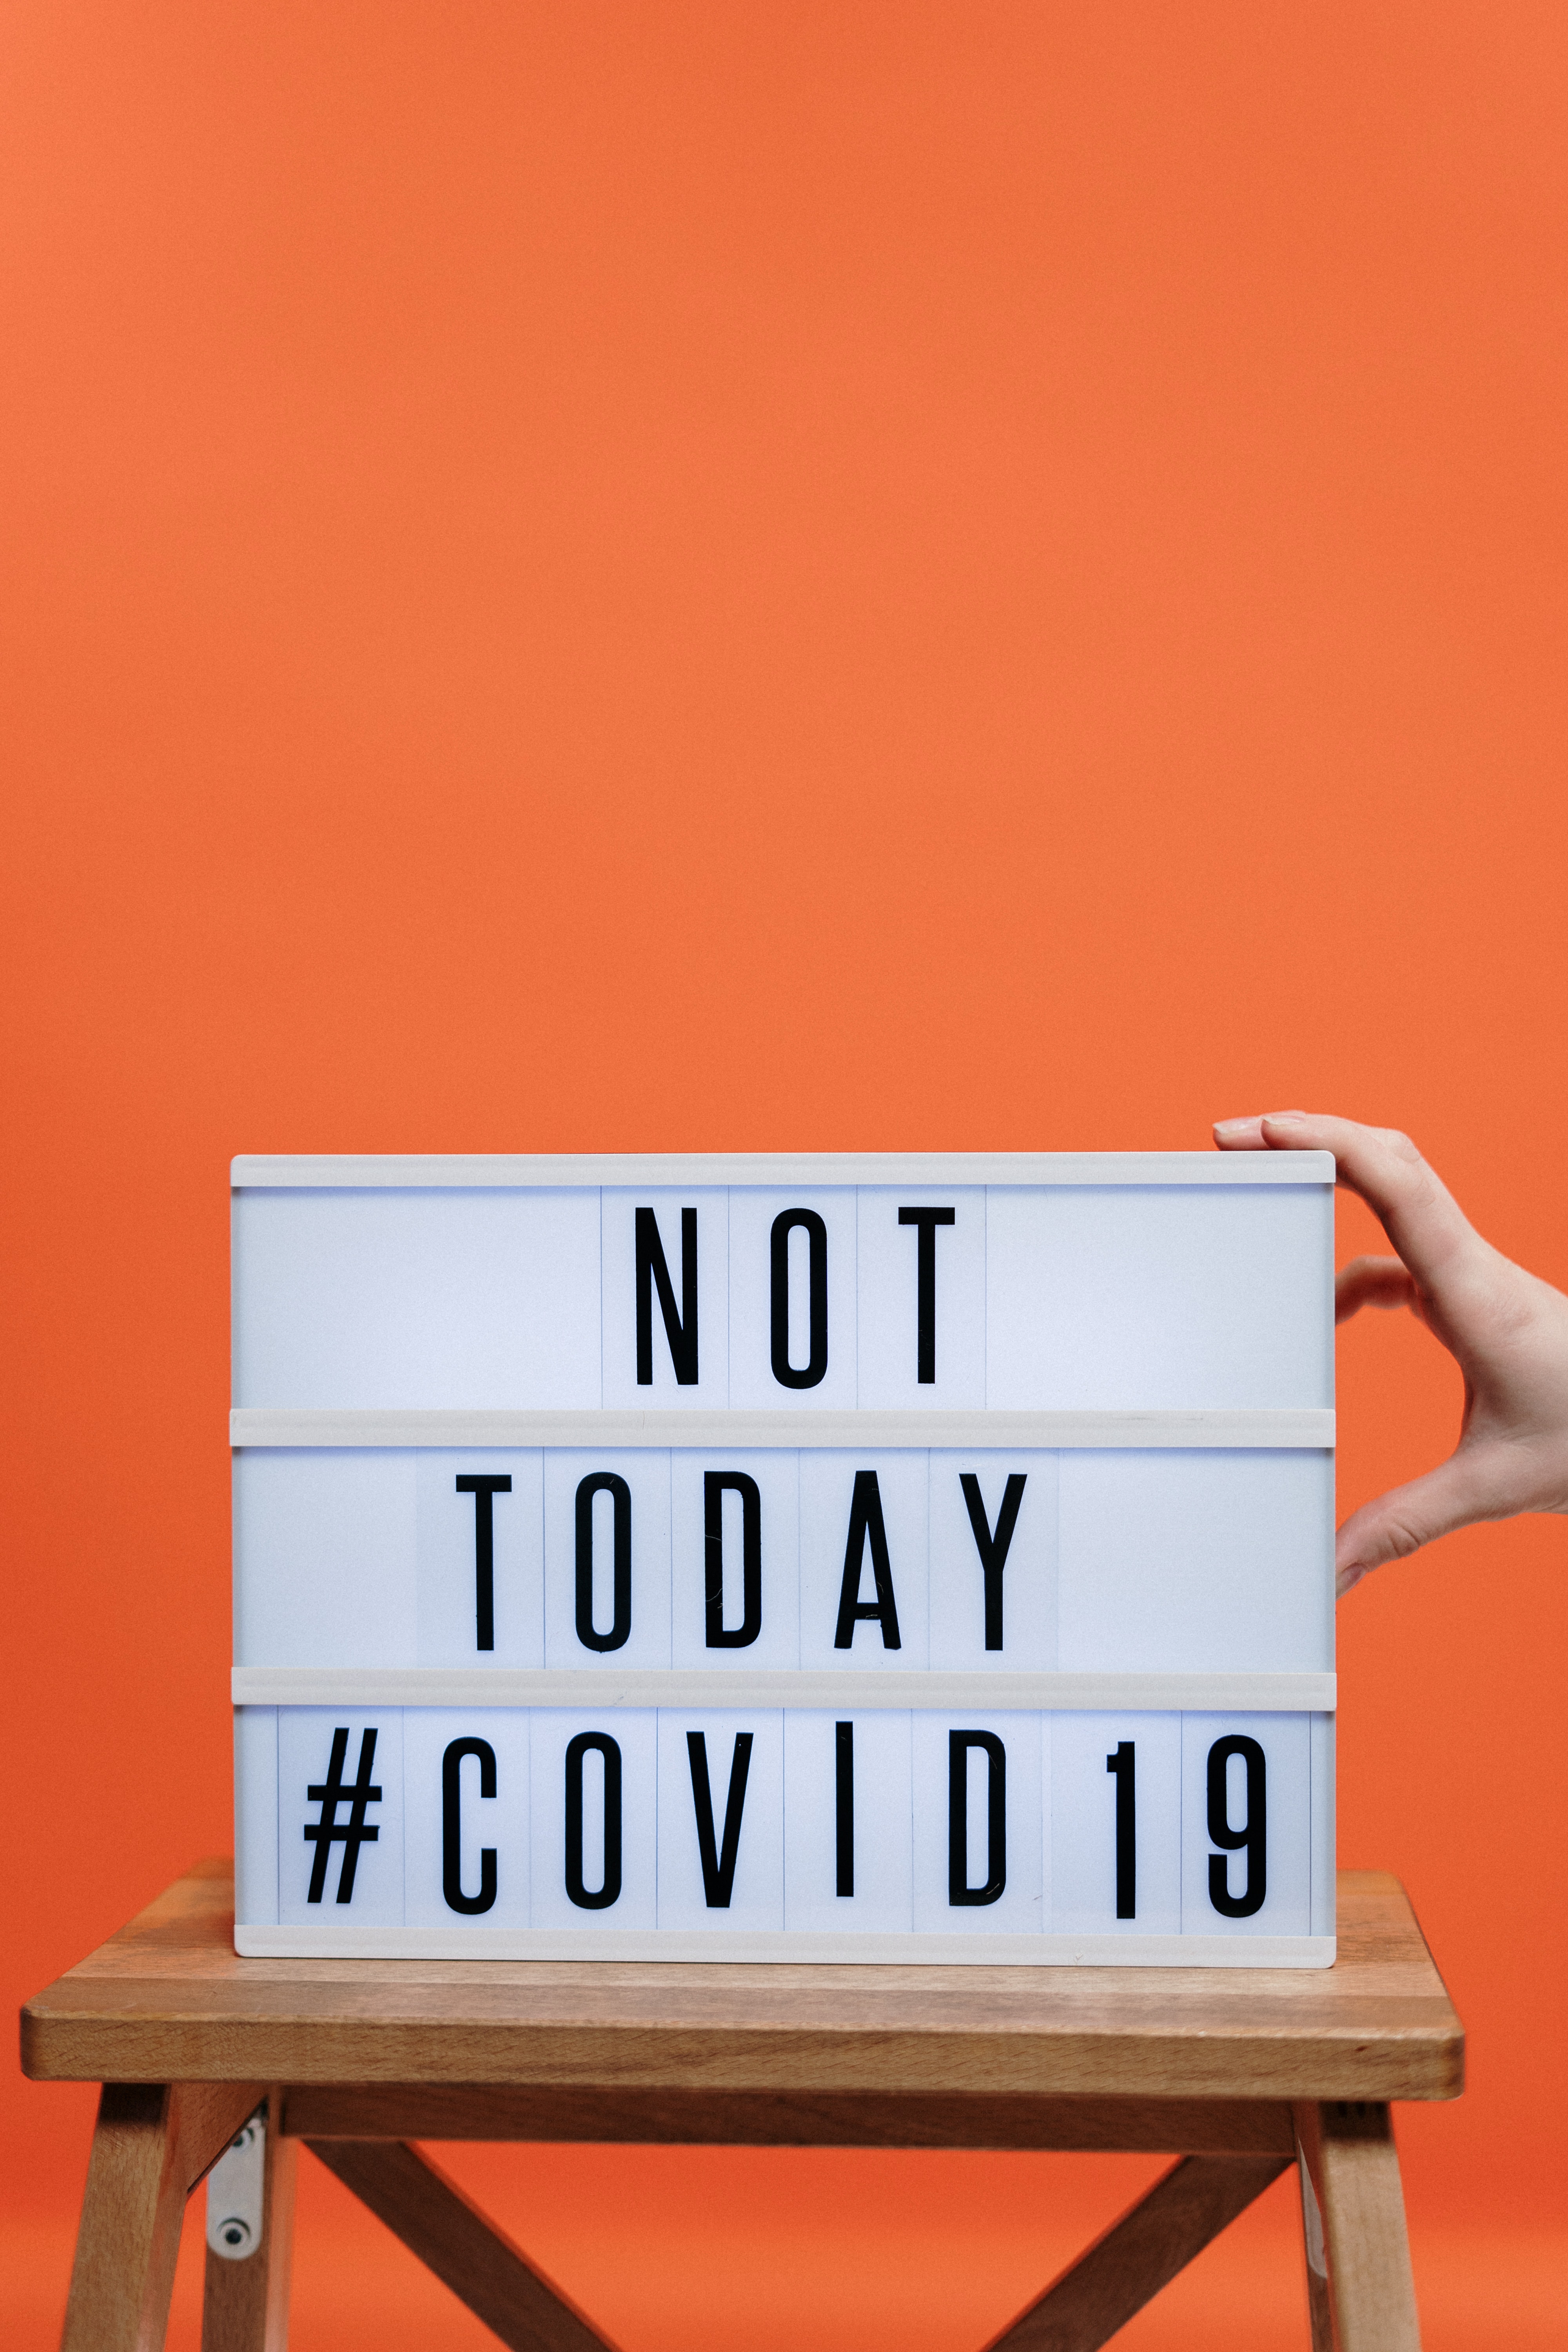 Not today #covid 19 tile sign with an orange background